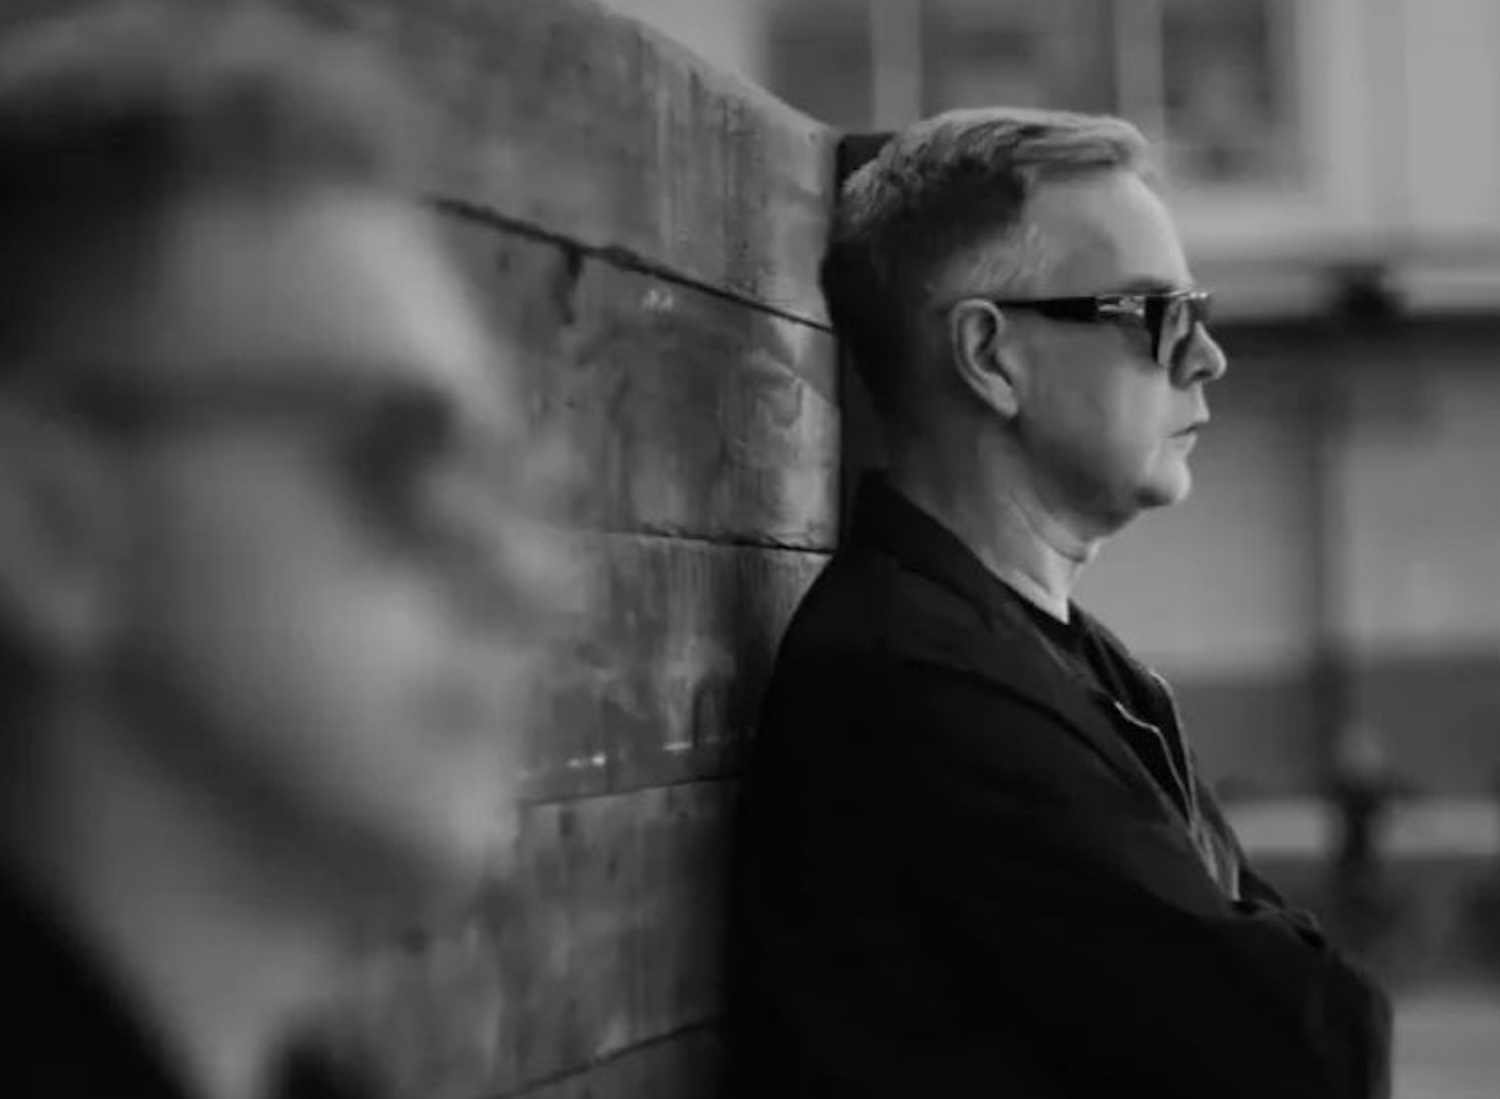 Depeche Mode making music after death of Andy Fletcher in May